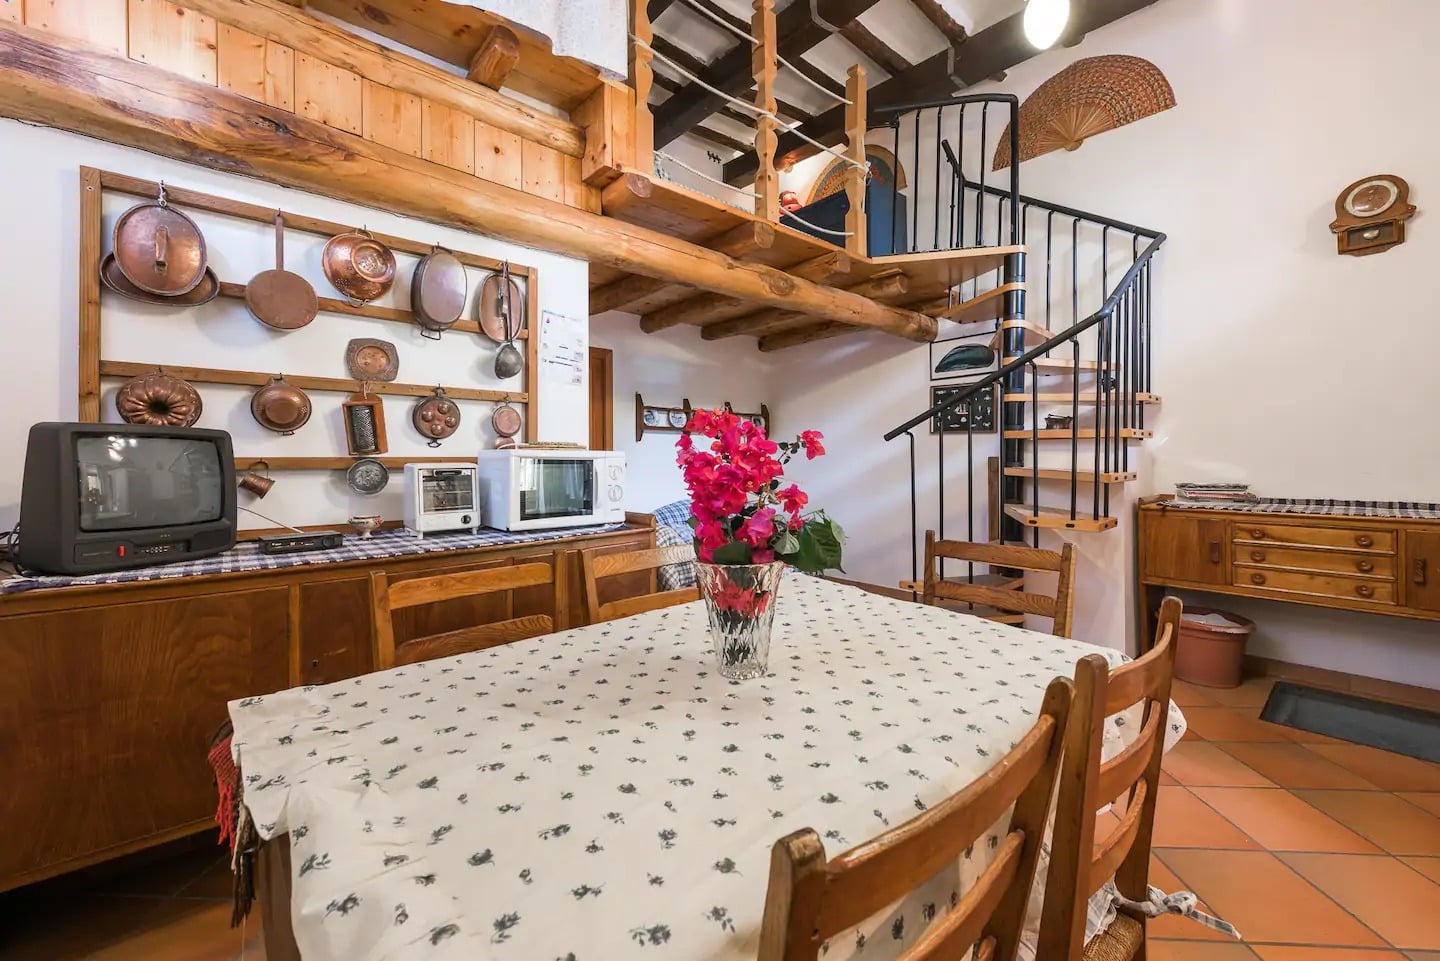 Nizza Airbnb nelle Isole Eolie